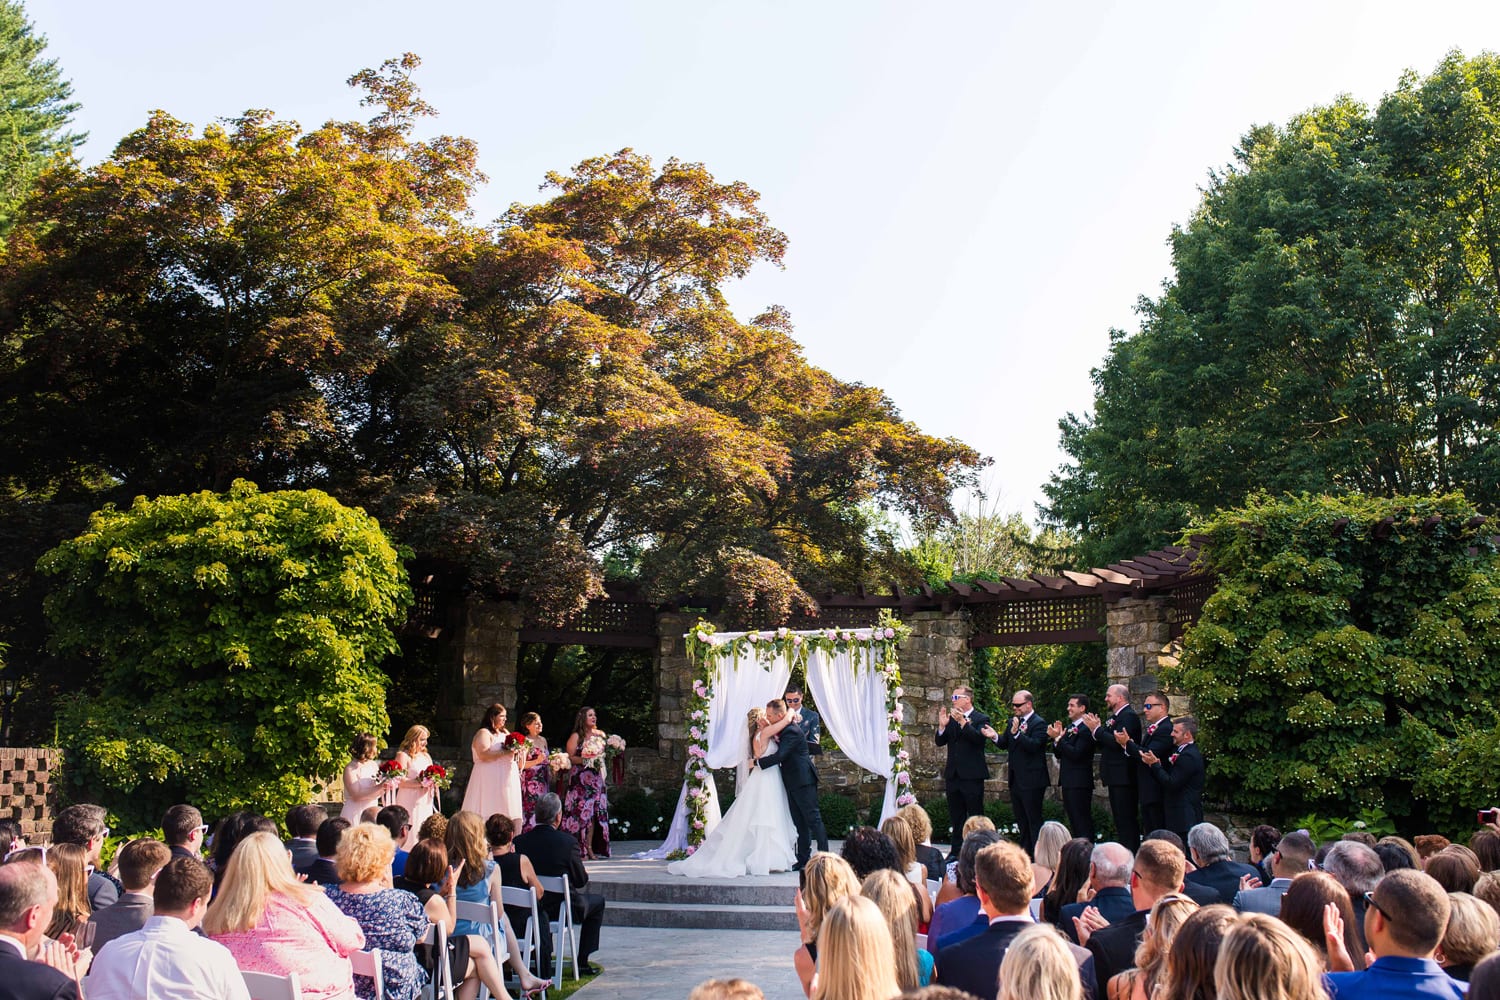 Outdoor wedding ceremony at Le Chateau in South Salem, NY